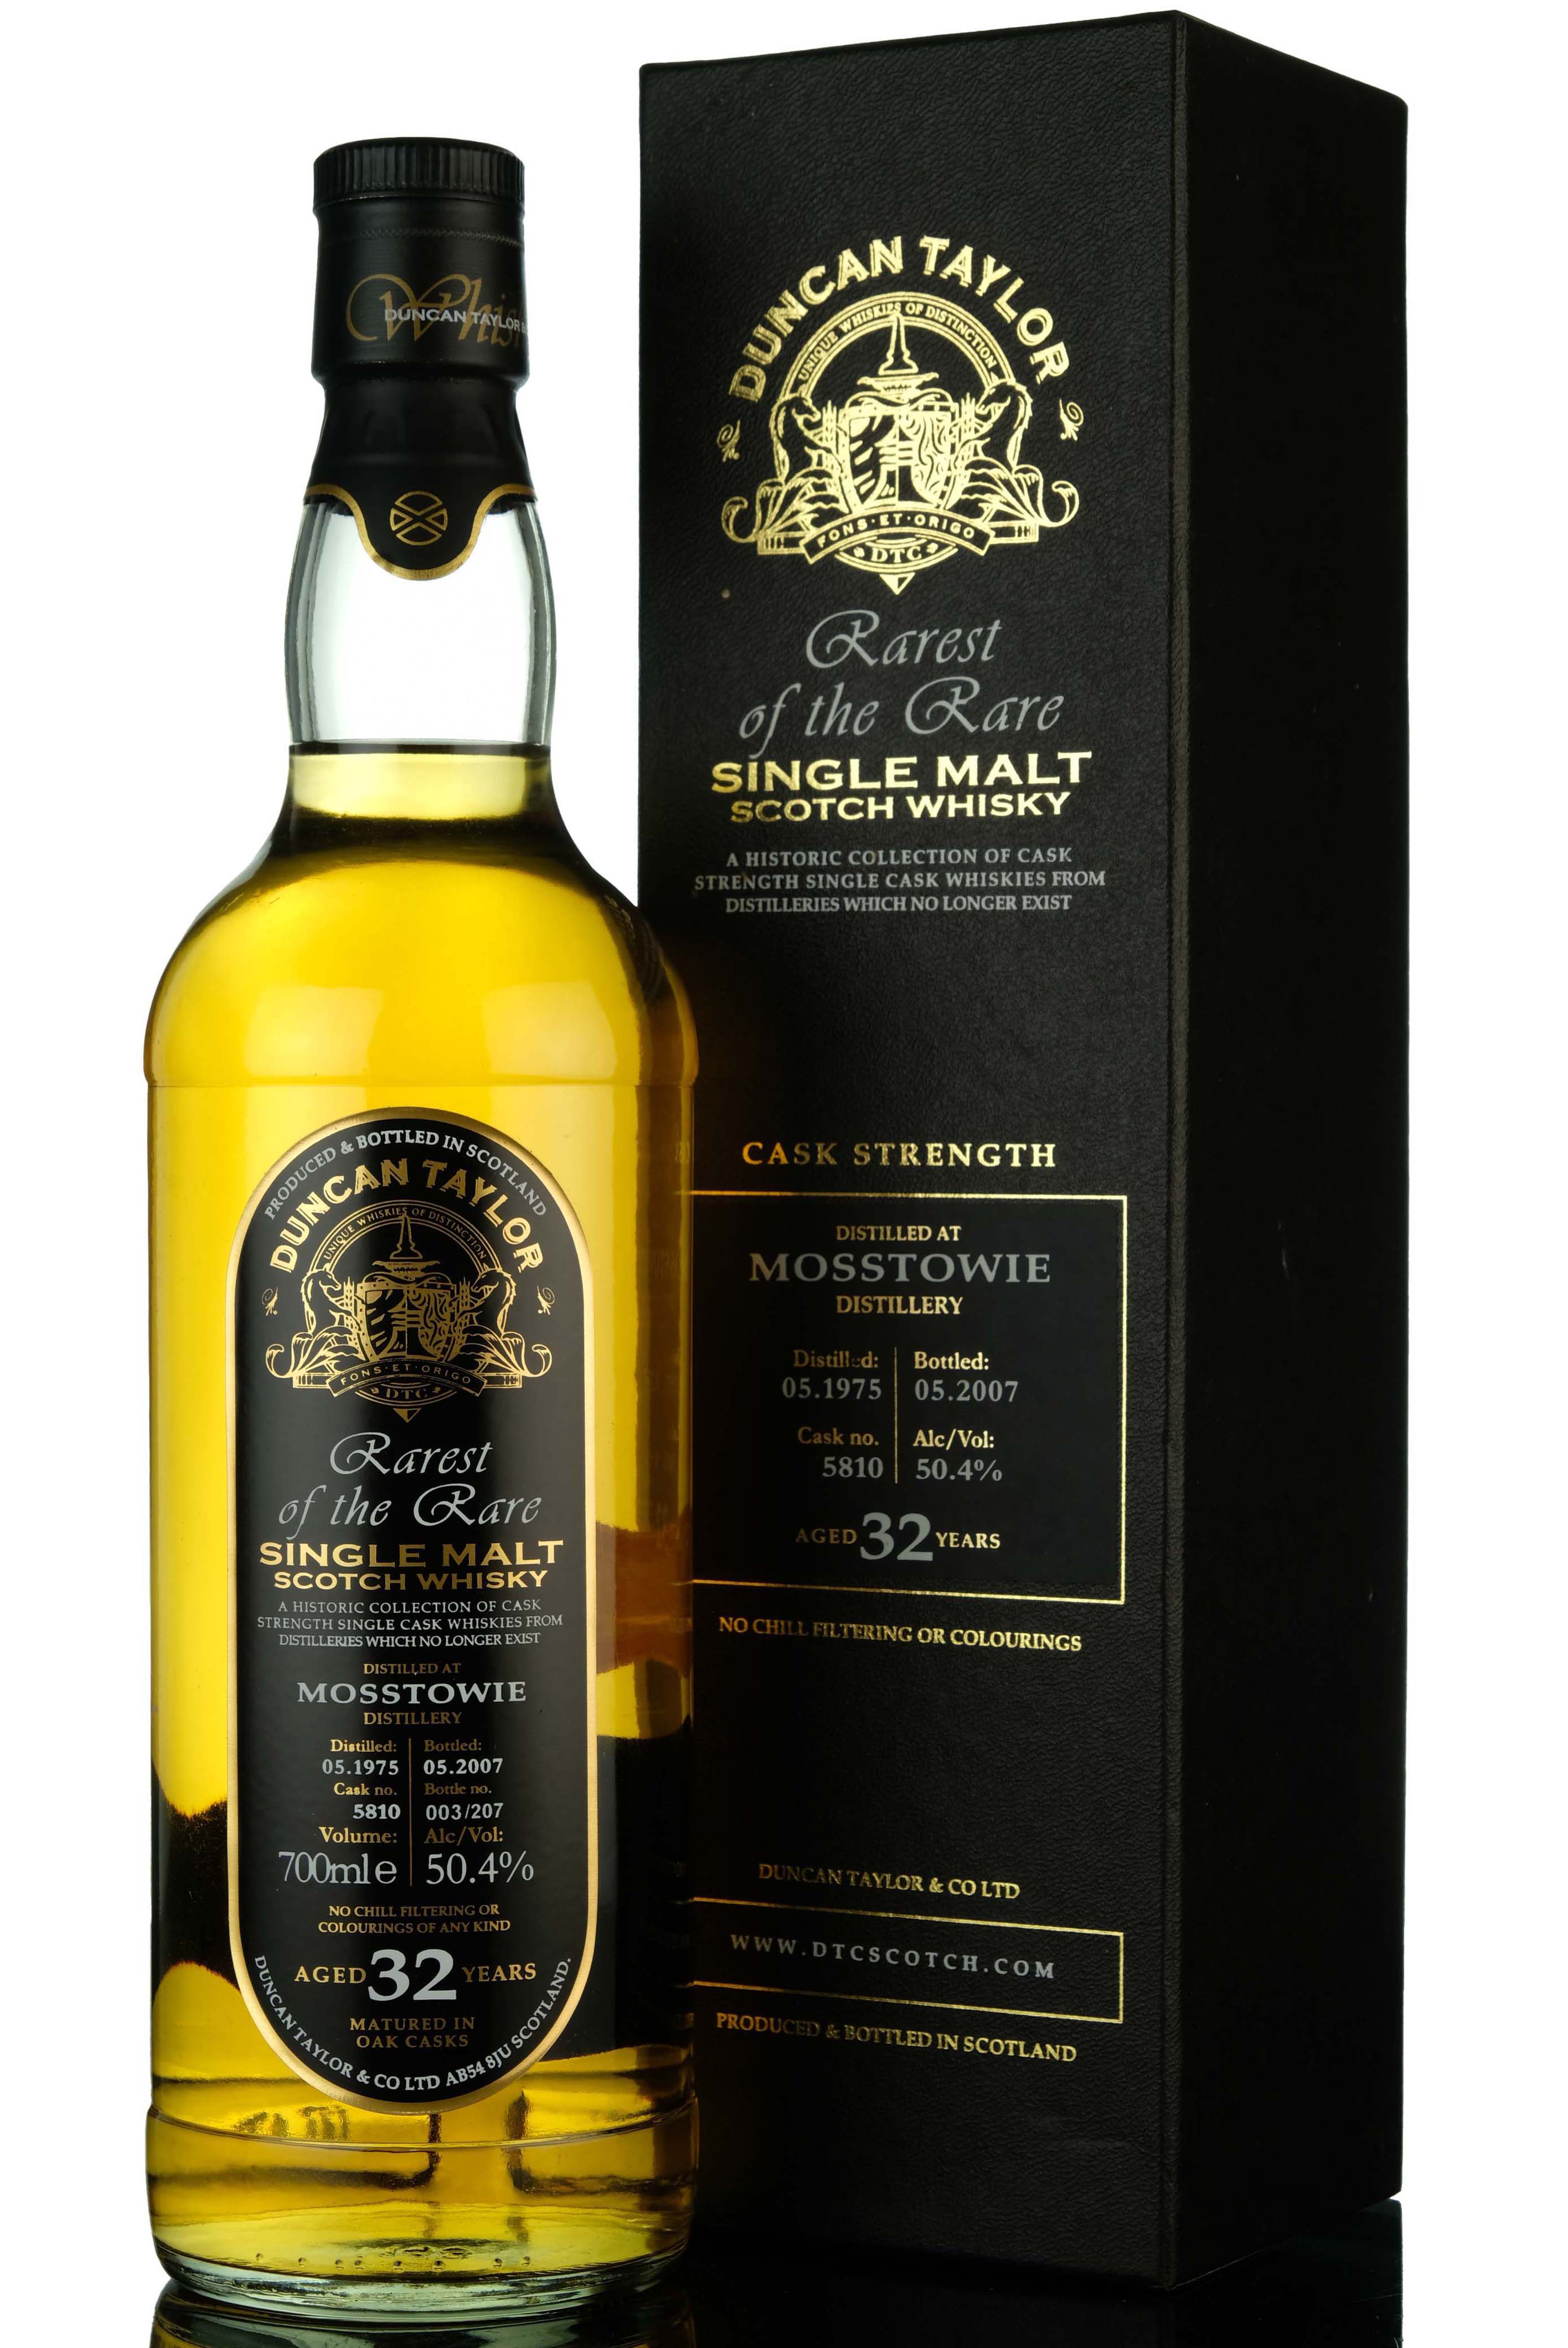 Mosstowie 1975-2007 - 32 Year Old - Duncan Taylor - Rare Auld - Single Cask 5810